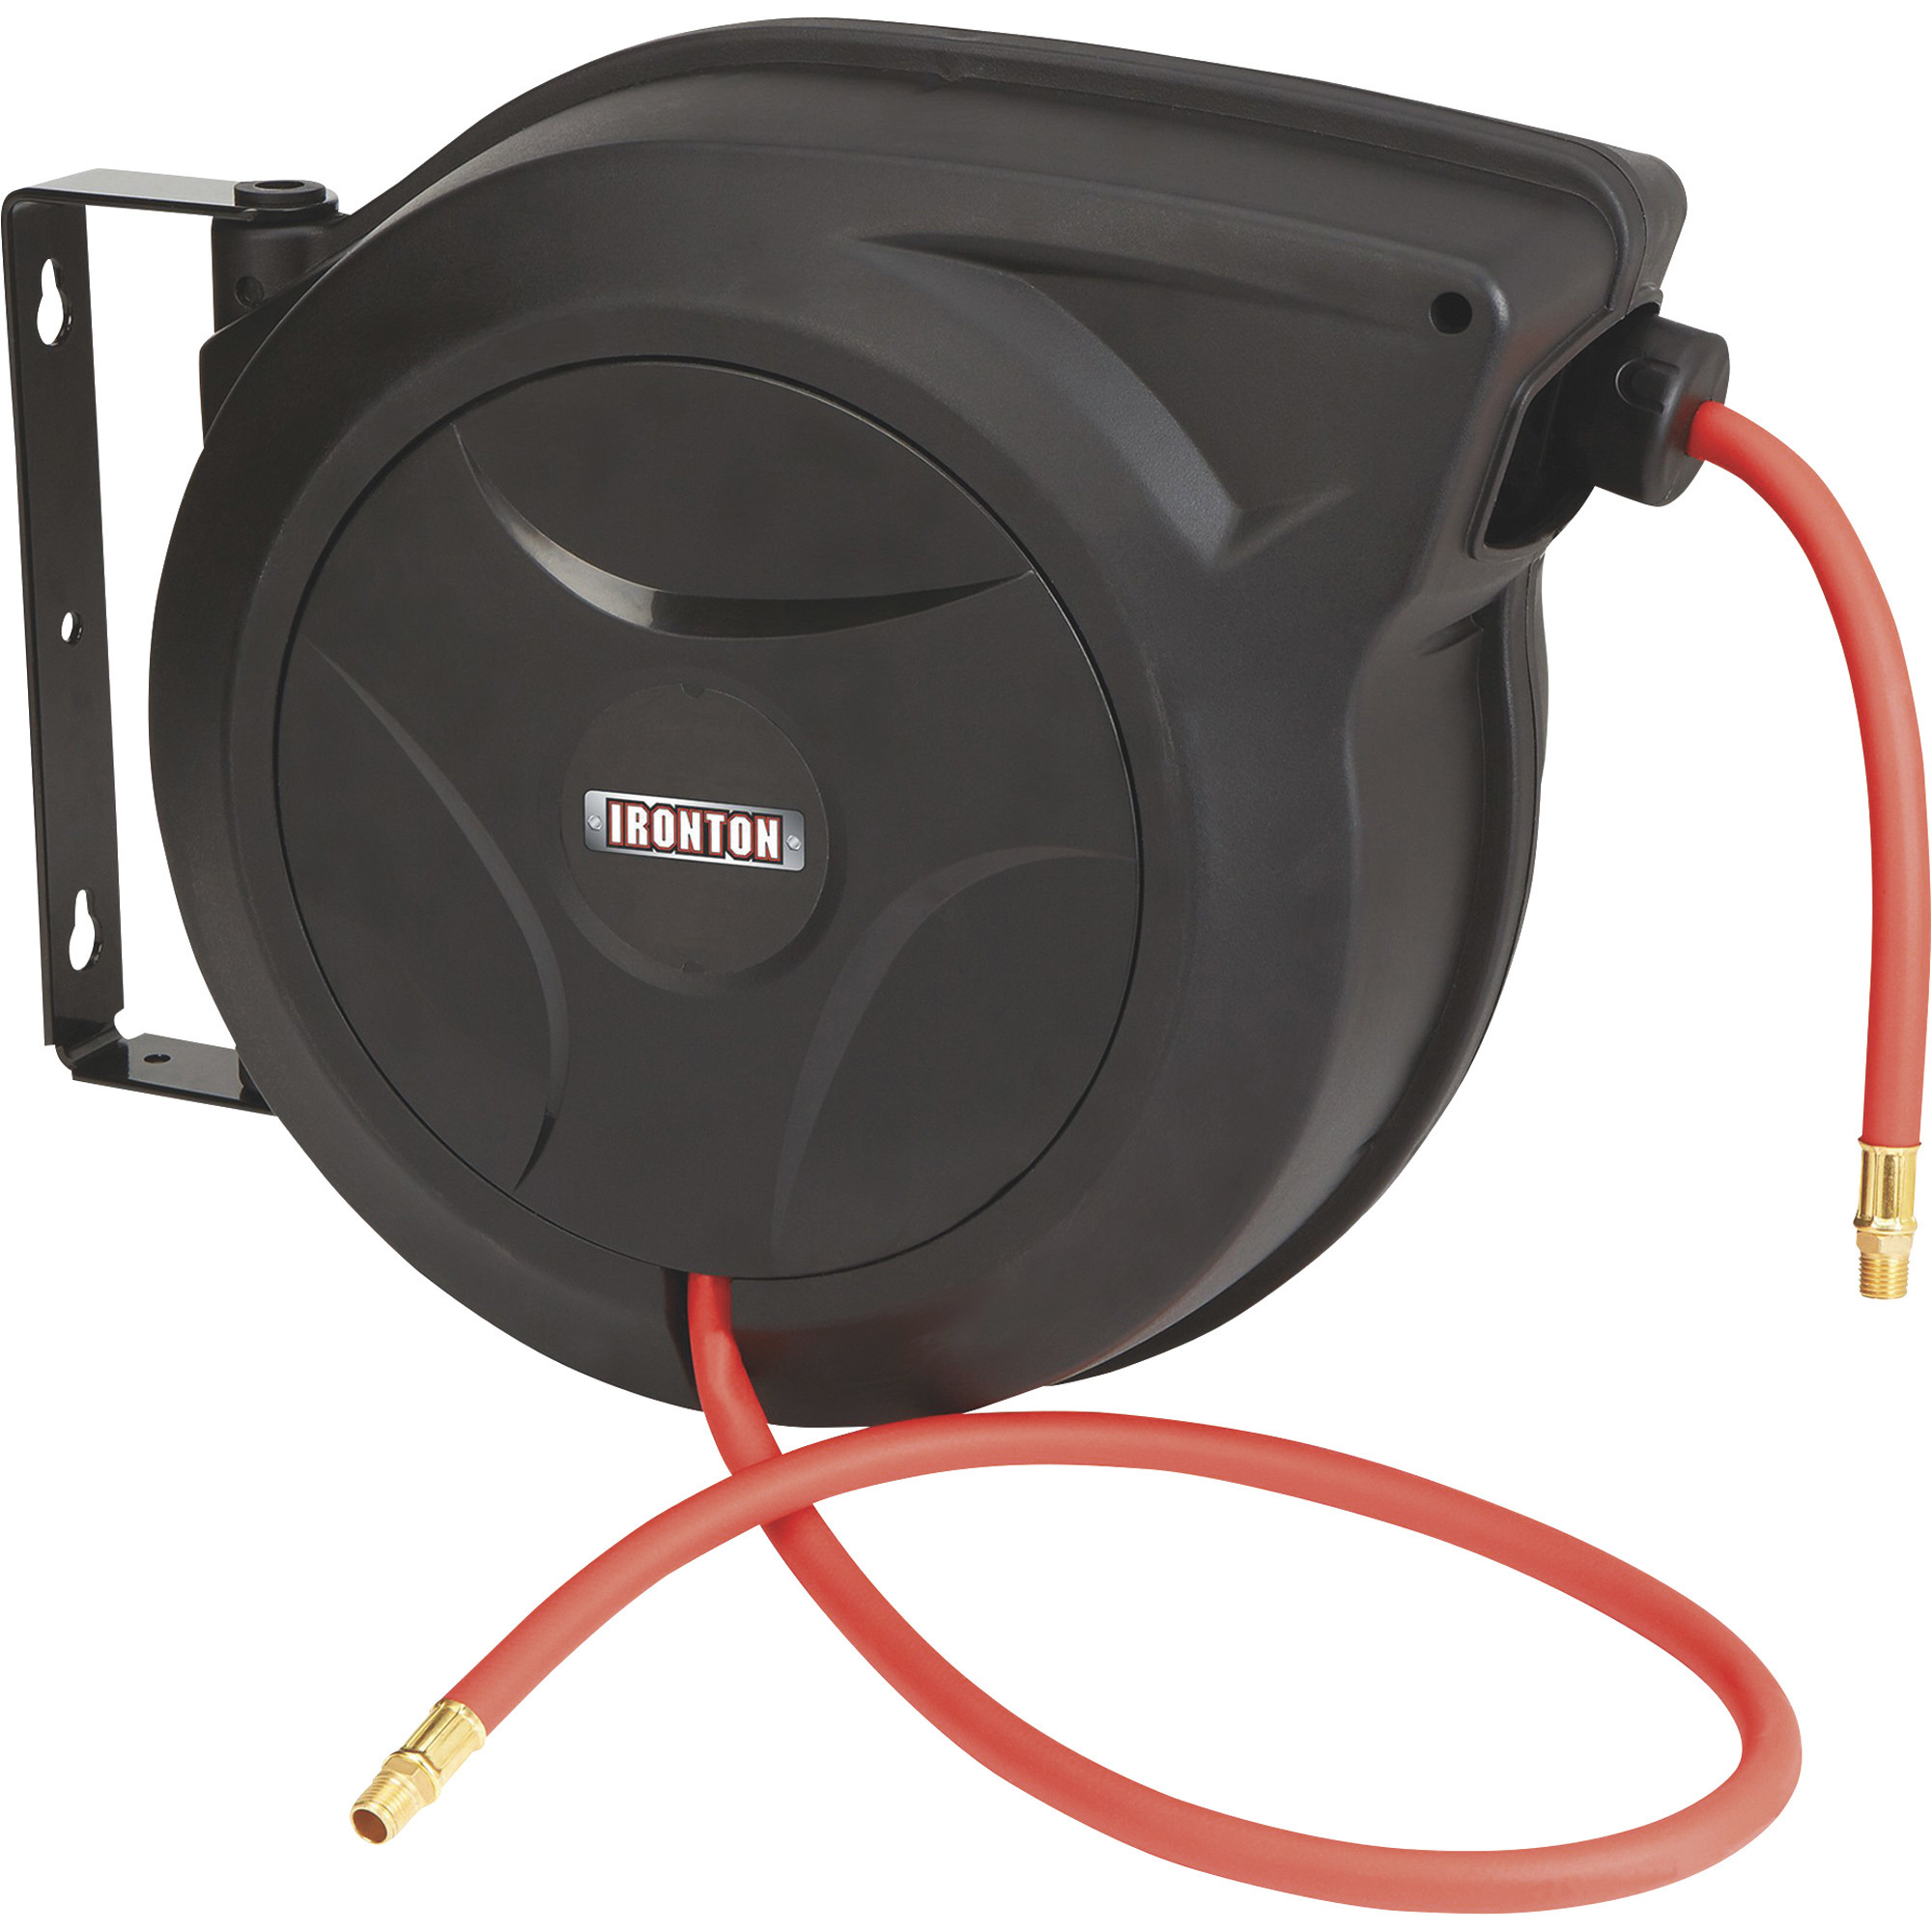 Ironton Retractable Auto-Return Hose Reel with 3/8Inch x 50ft. Hybrid Polymer Hose, 300 PSI